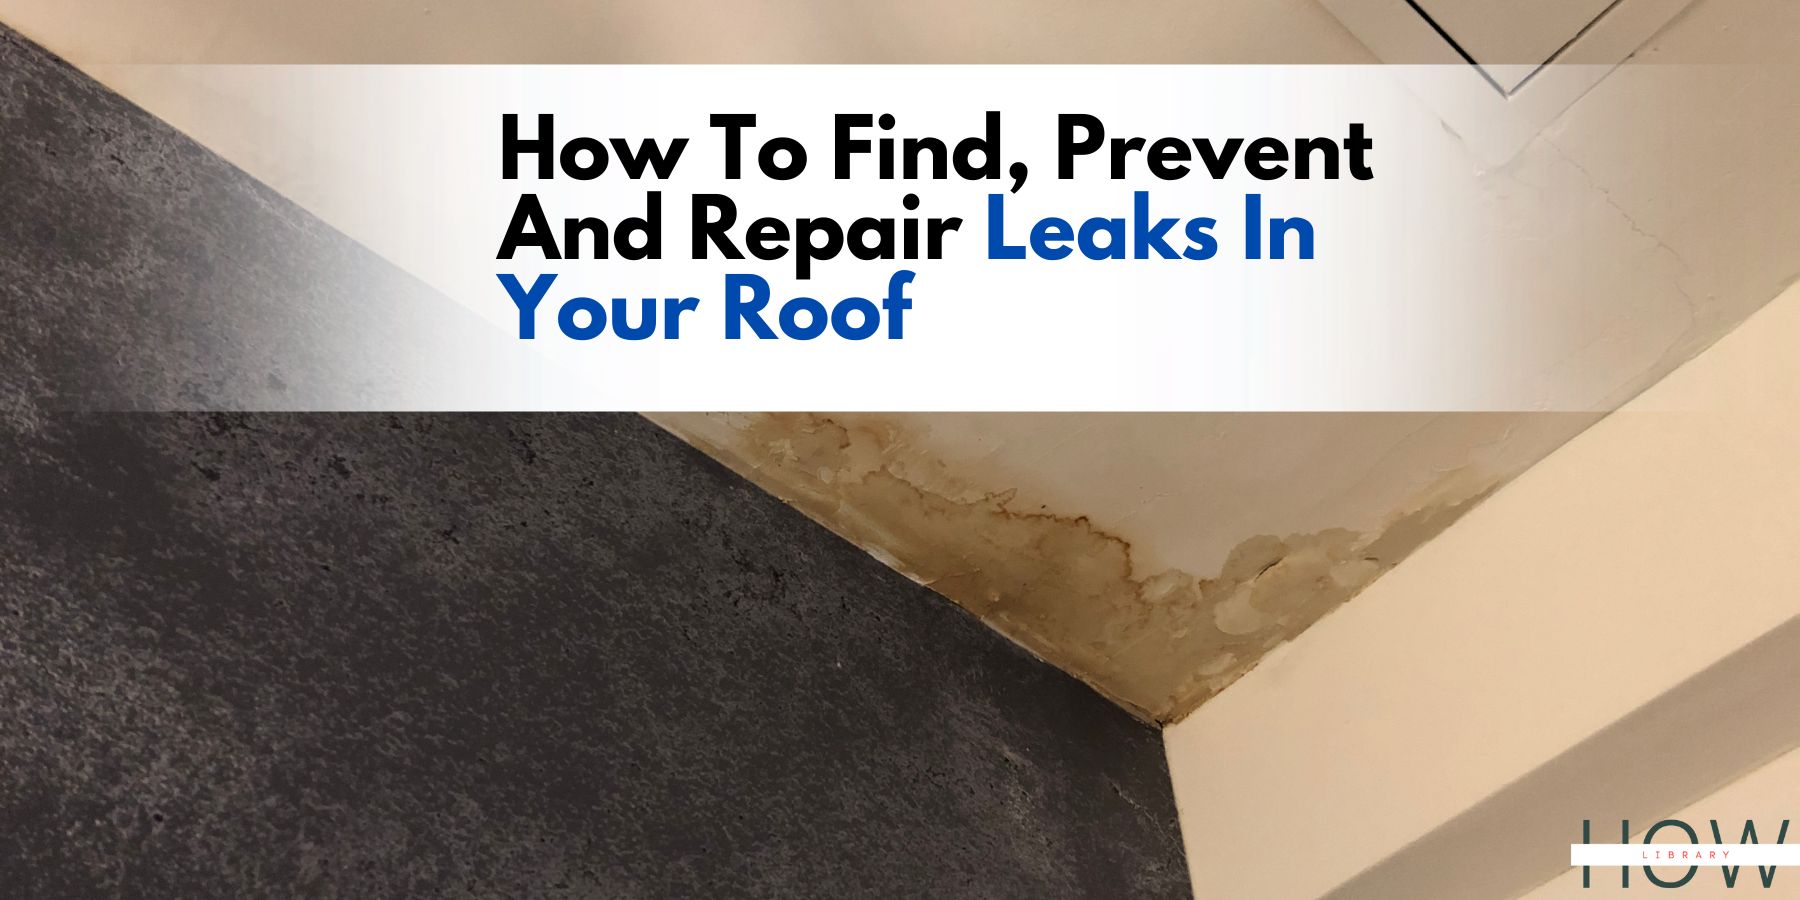 How To Find, Prevent And Repair Leaks In Your Roof